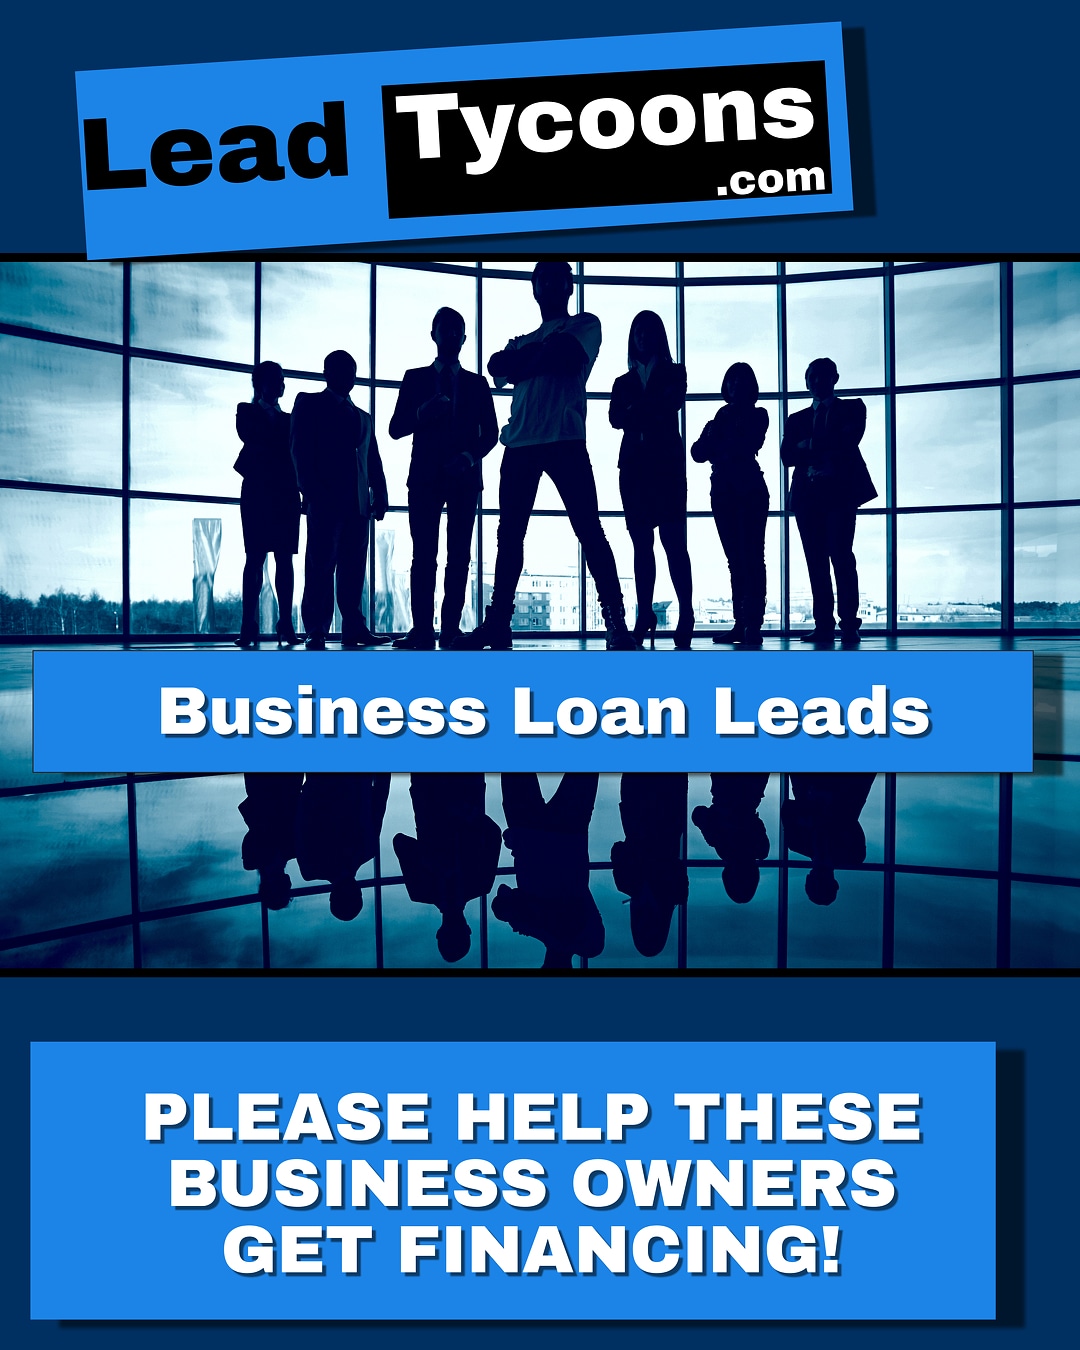 Small-Business-Loan-Leads-LeadTycoons